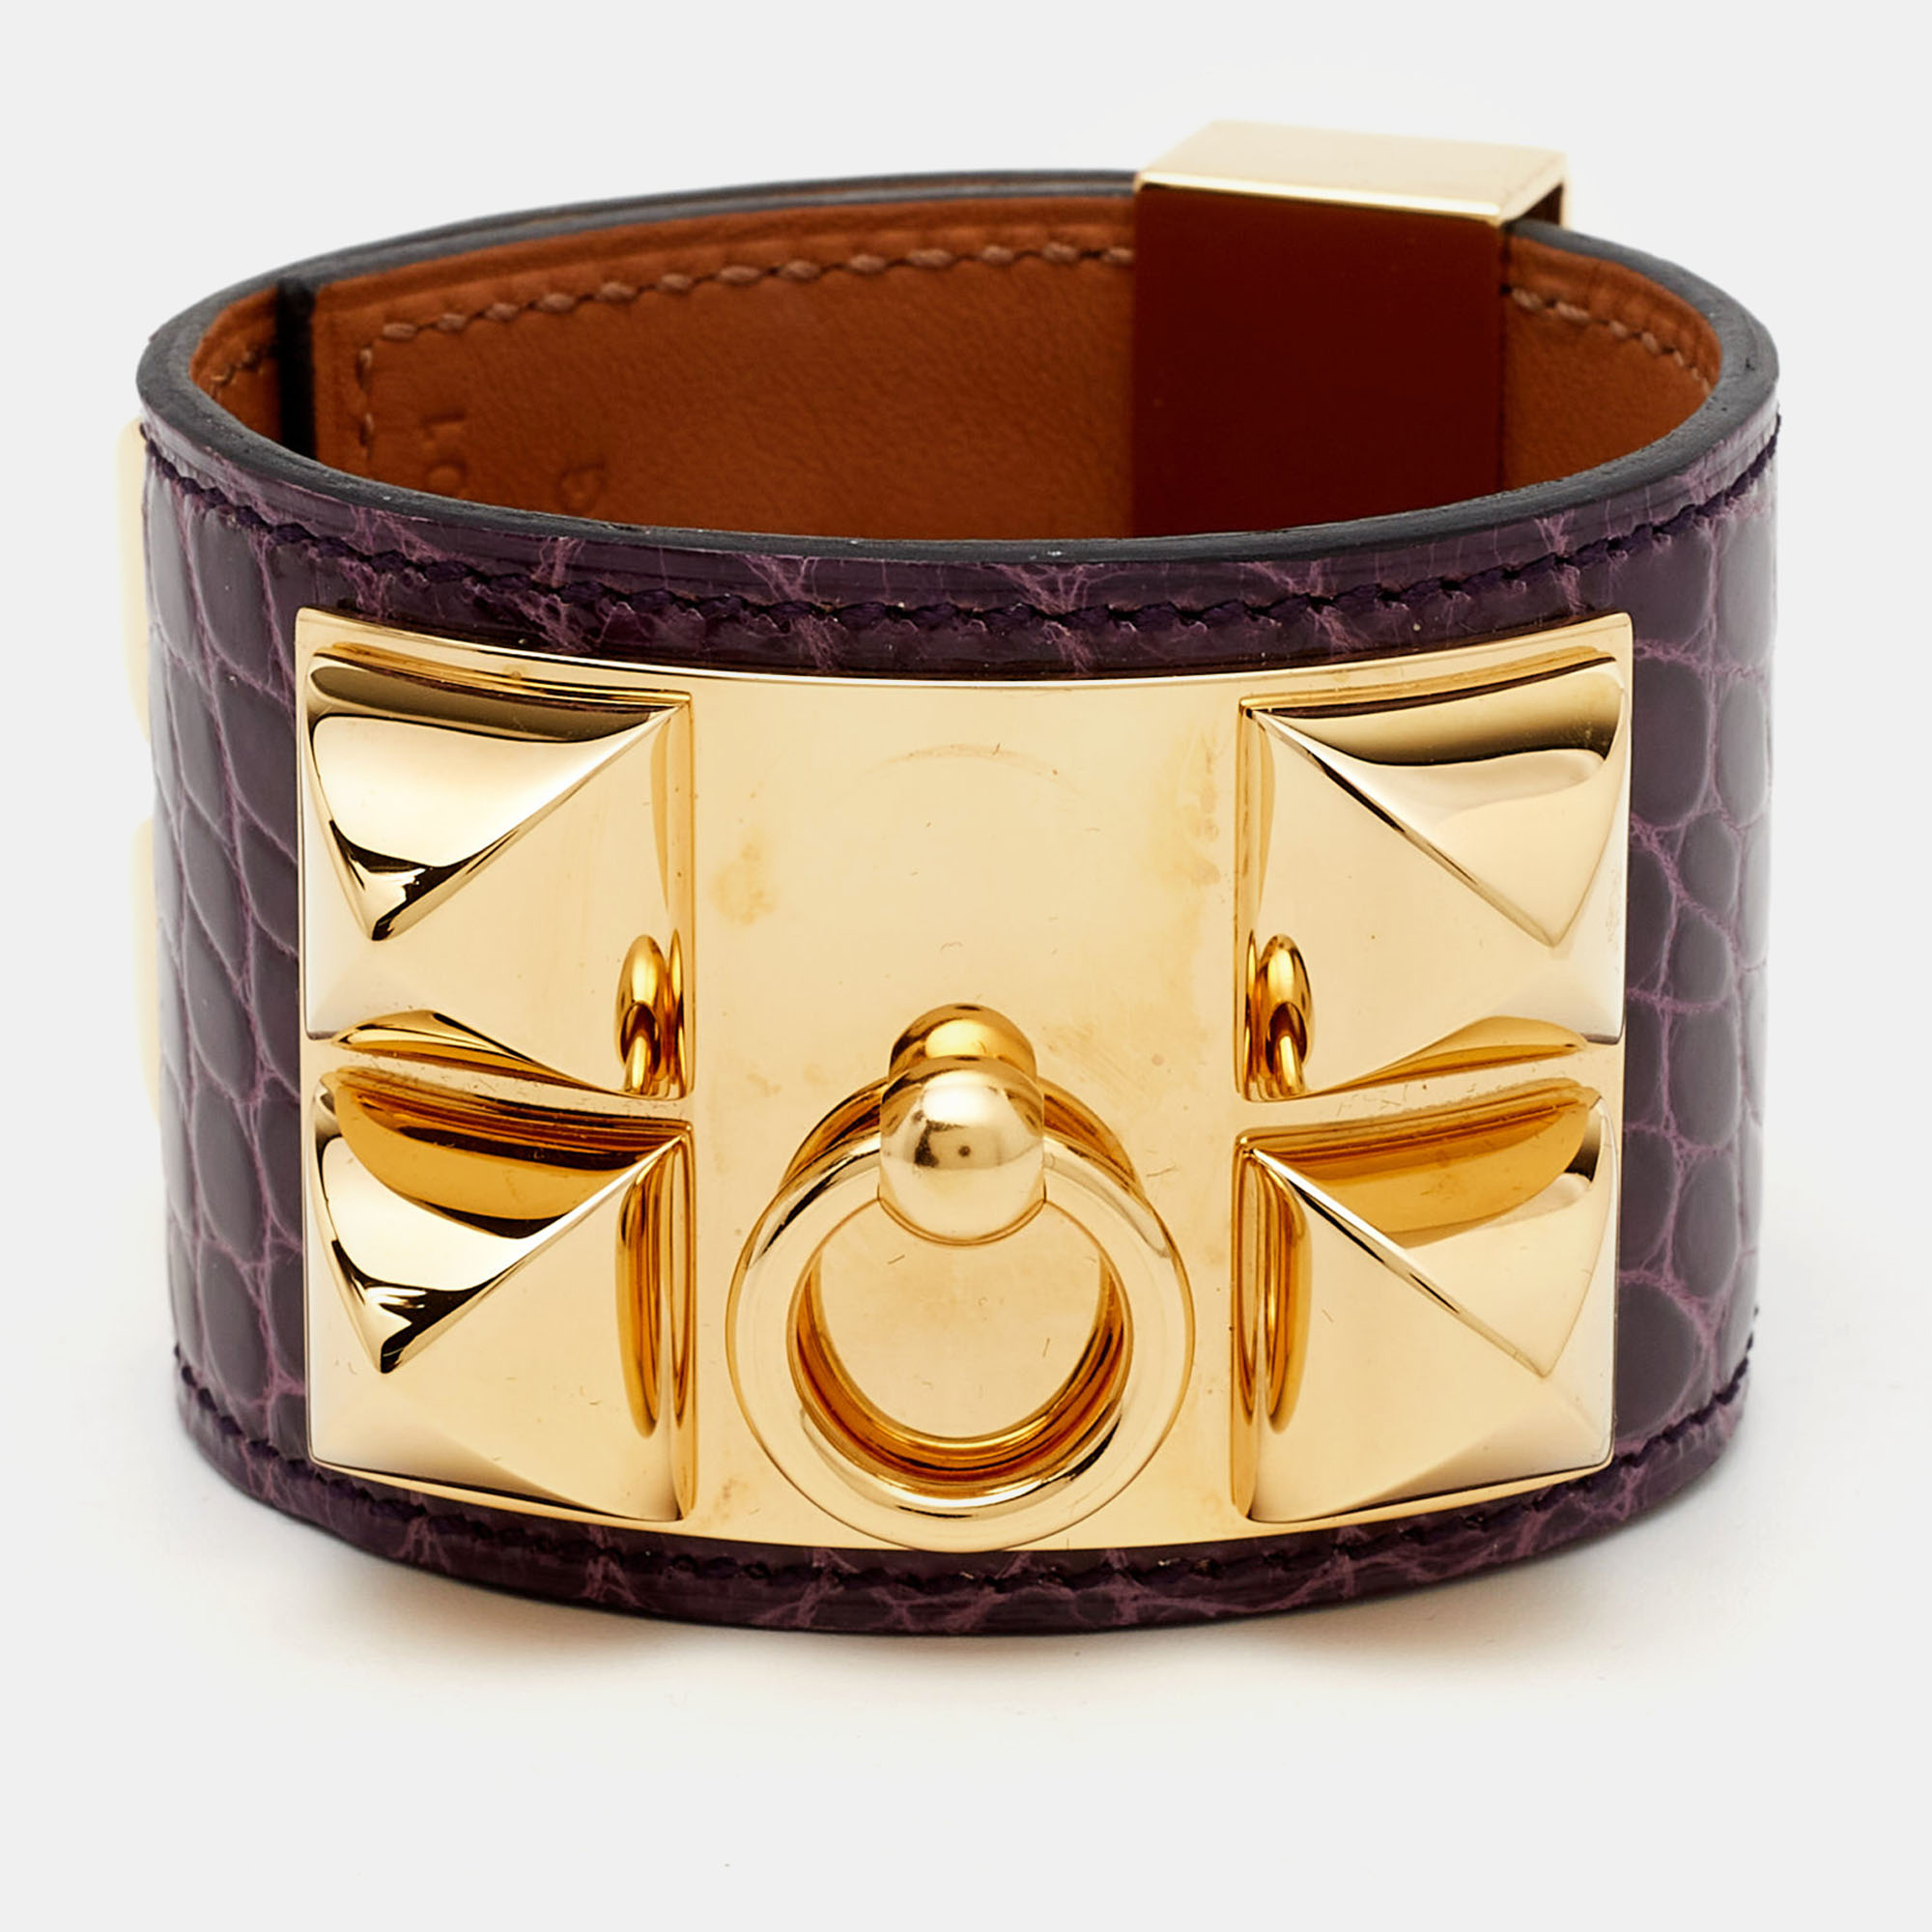 Add Hermes magic to the way you accessorize with this bracelet. This alligator leather bracelet is styled with fine lines and gold plated metal. Highlighted by signature details it is sure to add luxury charm to your ensemble.